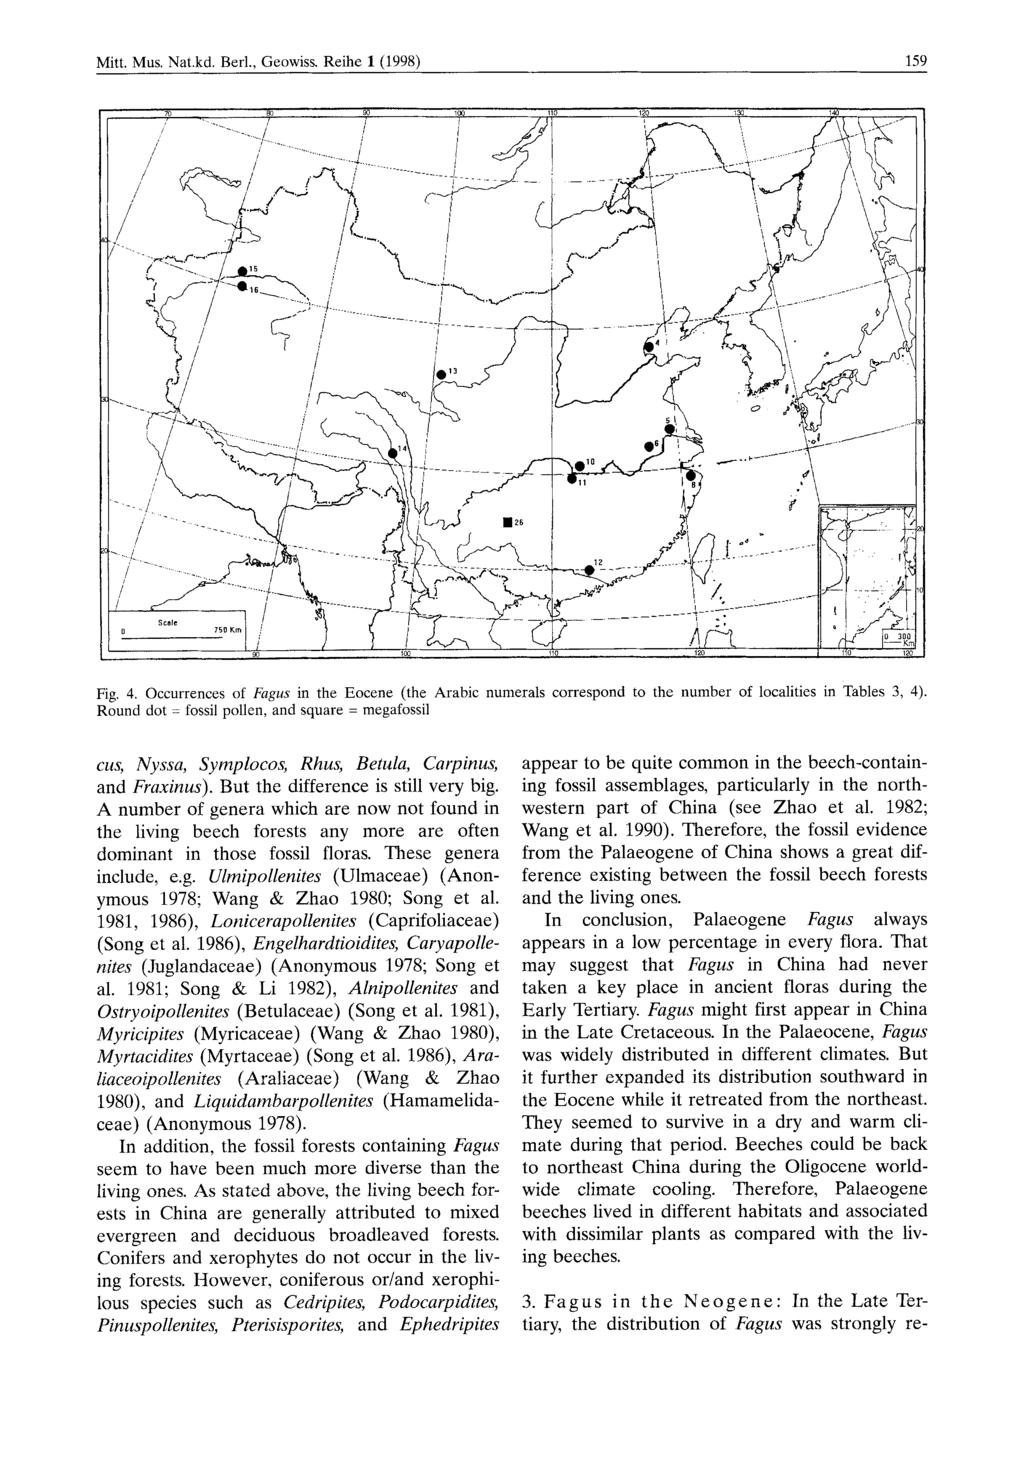 Mitt. Mus. Nat.kd. Berl.. Geowiss. Reihe 1 (1998) 159 Fig. 4. Occurrences of Fagus in the Eocene (the Arabic numerals correspond to the number of localities in Tables 3, 4).